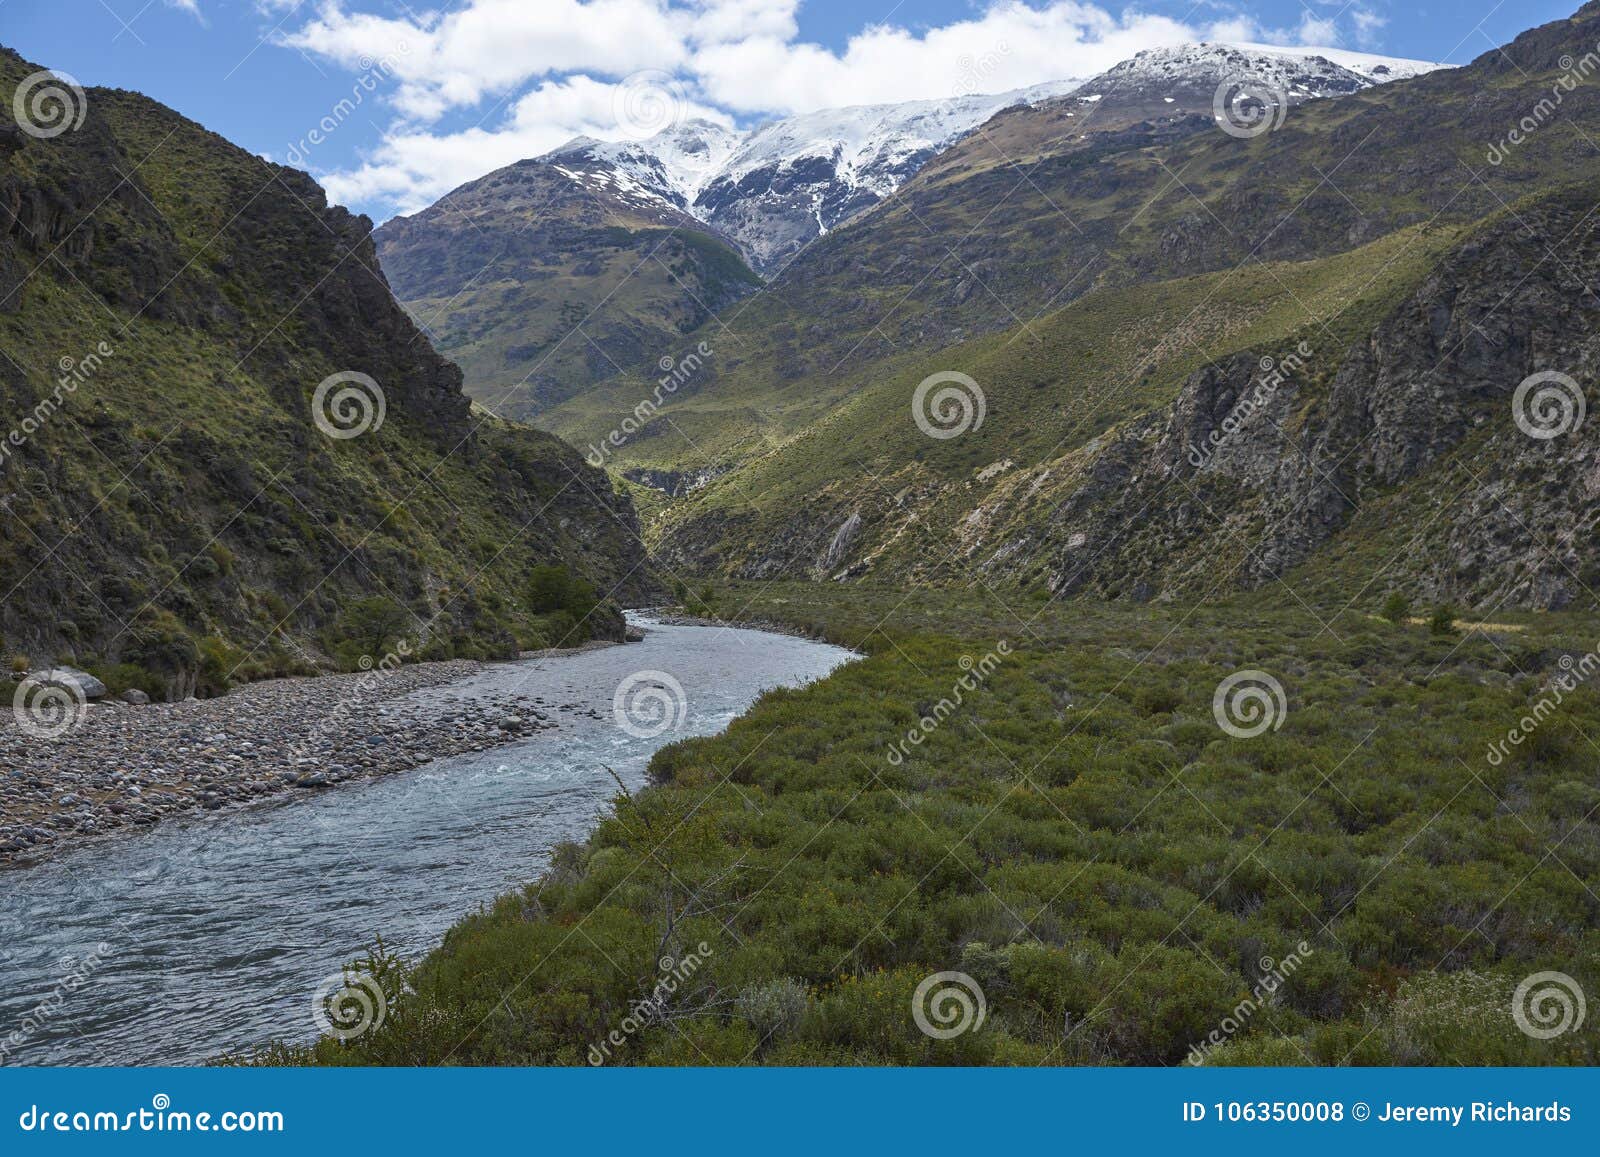 pristine river in valle chacabuco, northern patagonia, chile.